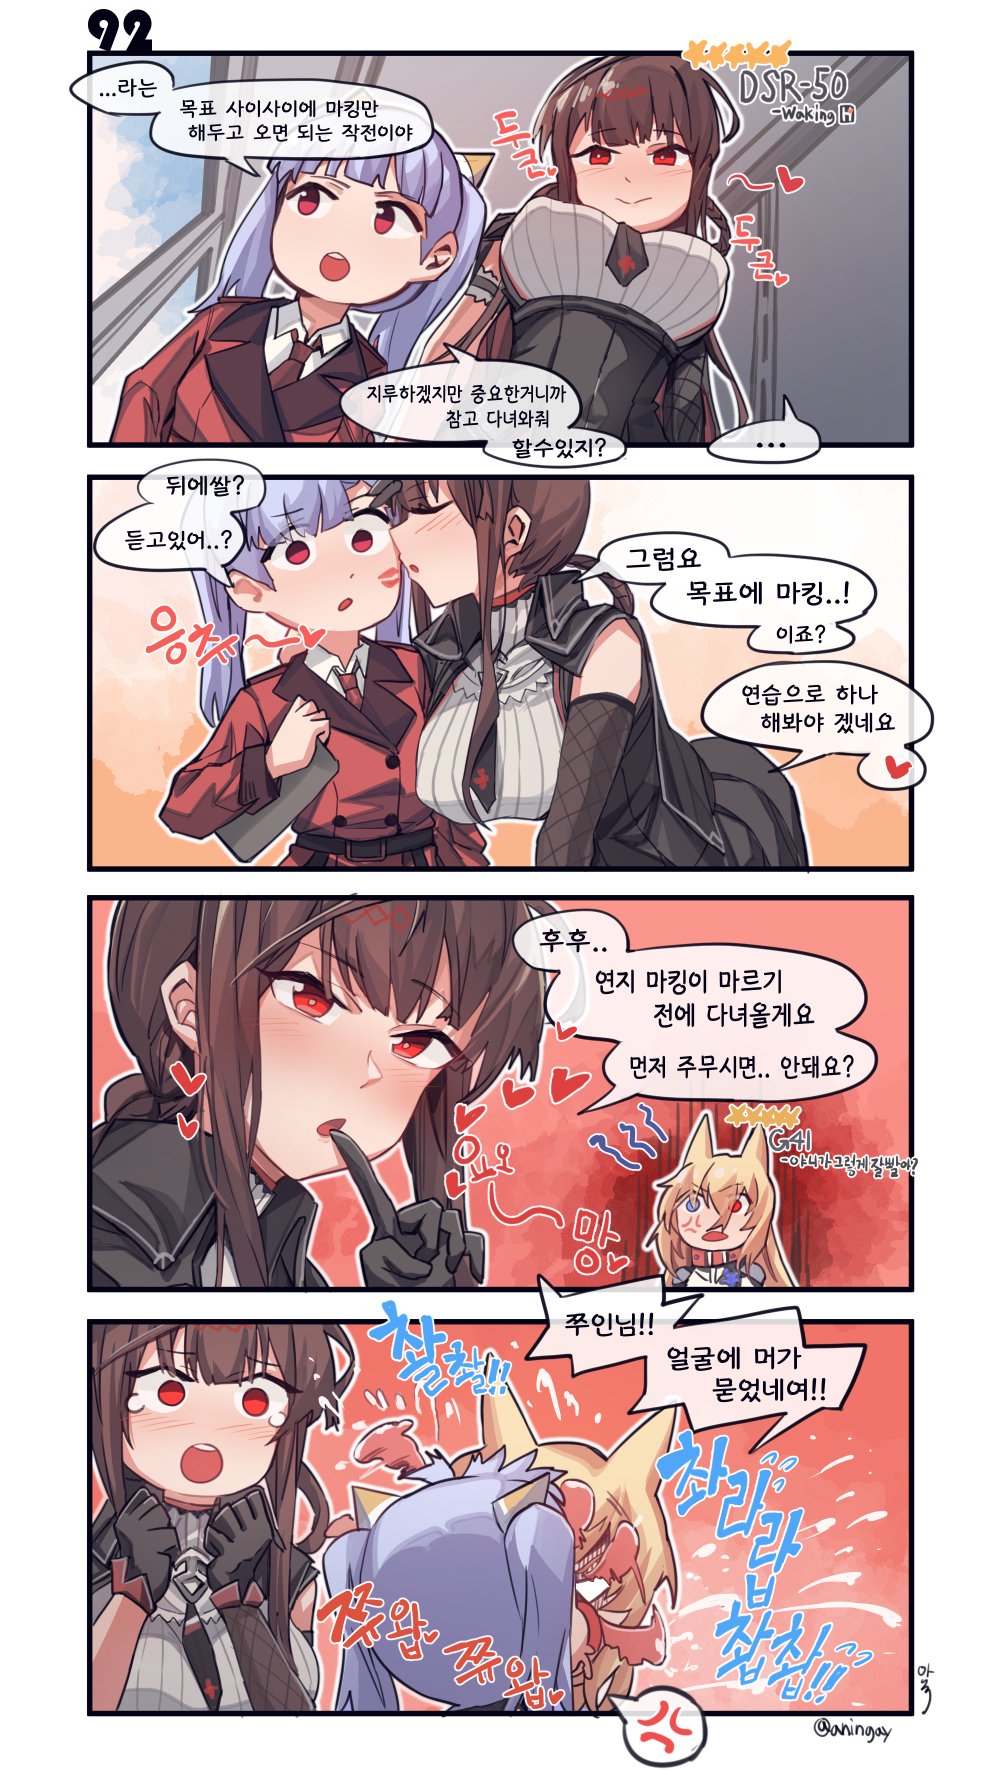 3girls anger_vein animal_ears aningay blonde_hair blush breasts brown_hair cheek_kiss closed_eyes closed_mouth crying crying_with_eyes_open dog_ears dsr-50_(girls_frontline) female_commander_(girls_frontline) g41_(girls_frontline) girls_frontline gloves hair_ribbon hat heart height_difference heterochromia highres jealous kiss korean_text large_breasts licking lips lipstick_mark long_hair military military_uniform multiple_girls necktie open_mouth purple_hair red_eyes ribbon saliva shaded_face shiny shiny_hair small_breasts star teardrop tears tied_hair tongue tongue_out twintails uniform yuri